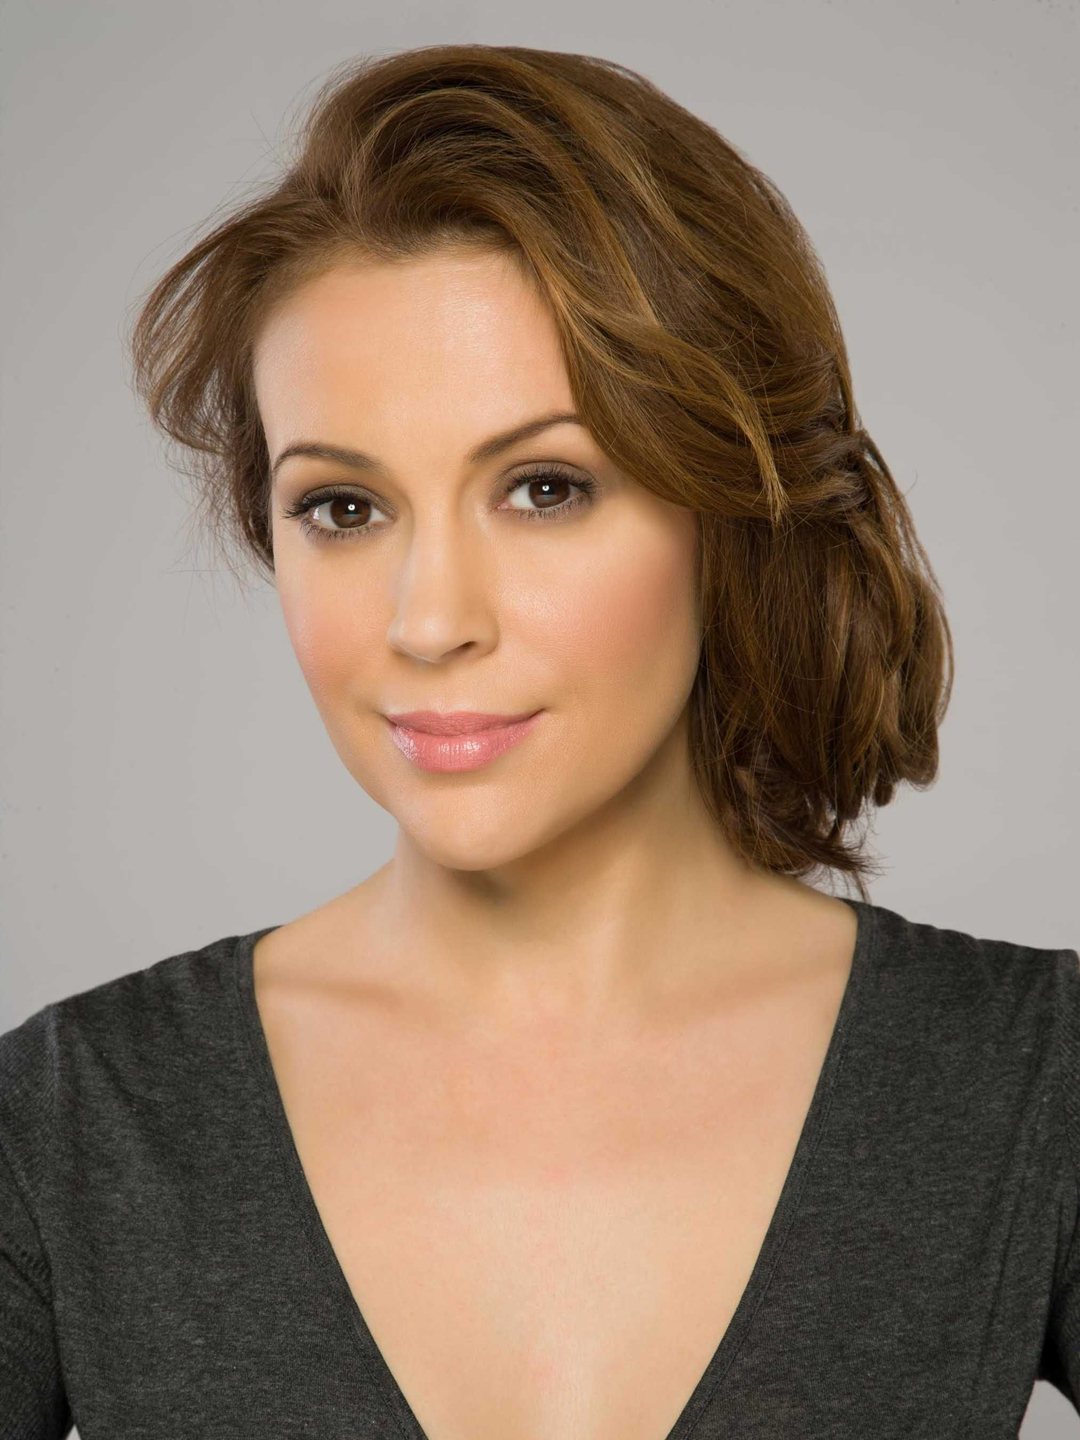 Alyssa Milano how old is she